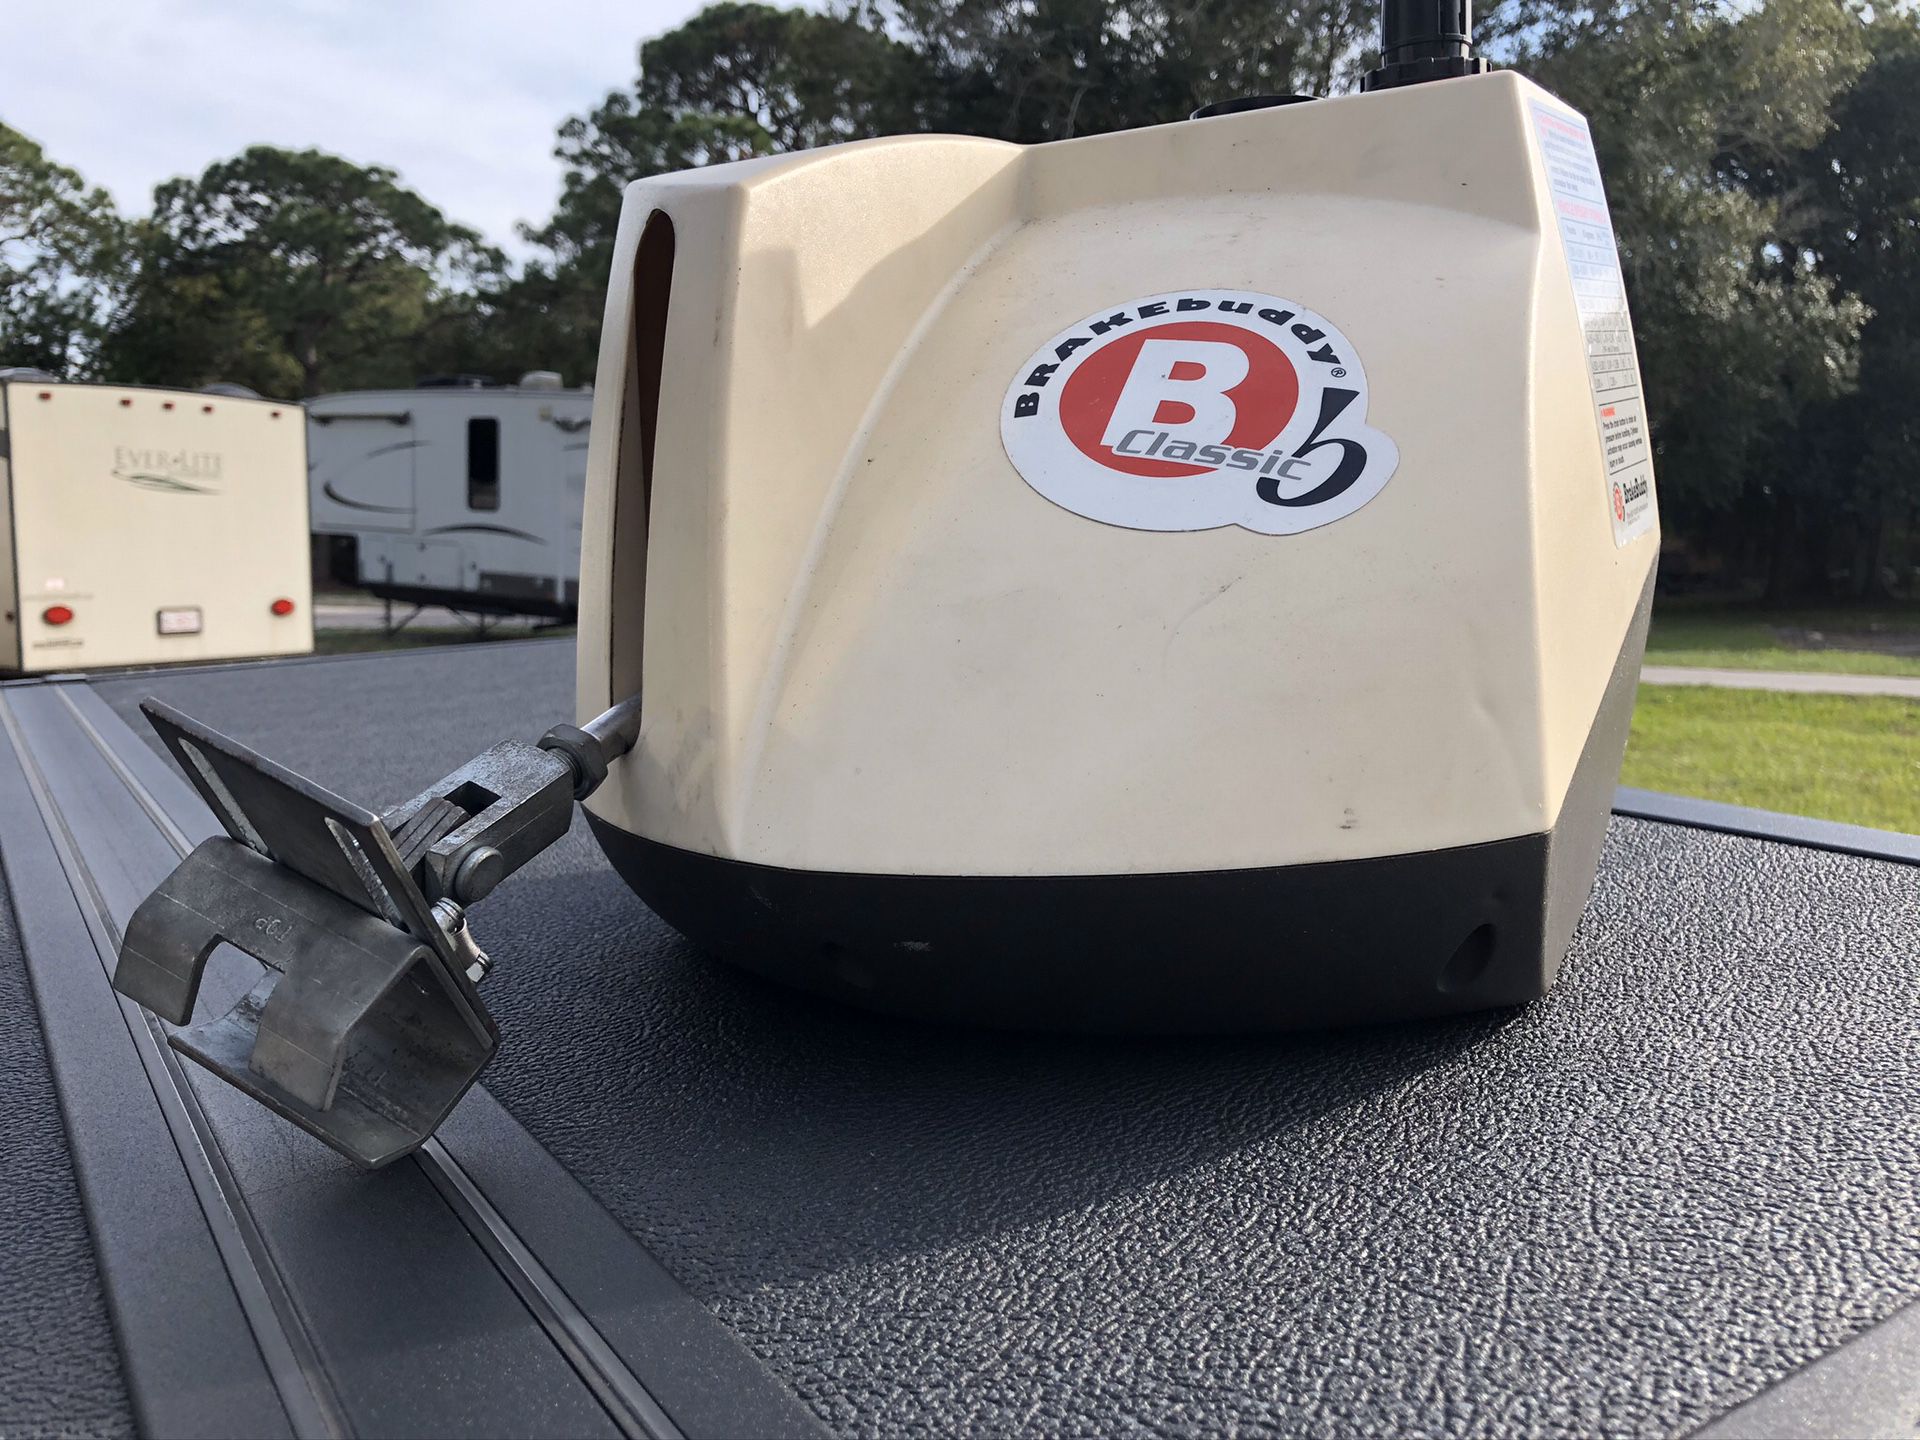 Brake Assist for towed vehicle. Work's great. Brake Buddy B Classic RV Trailer Camping Towing Braking System